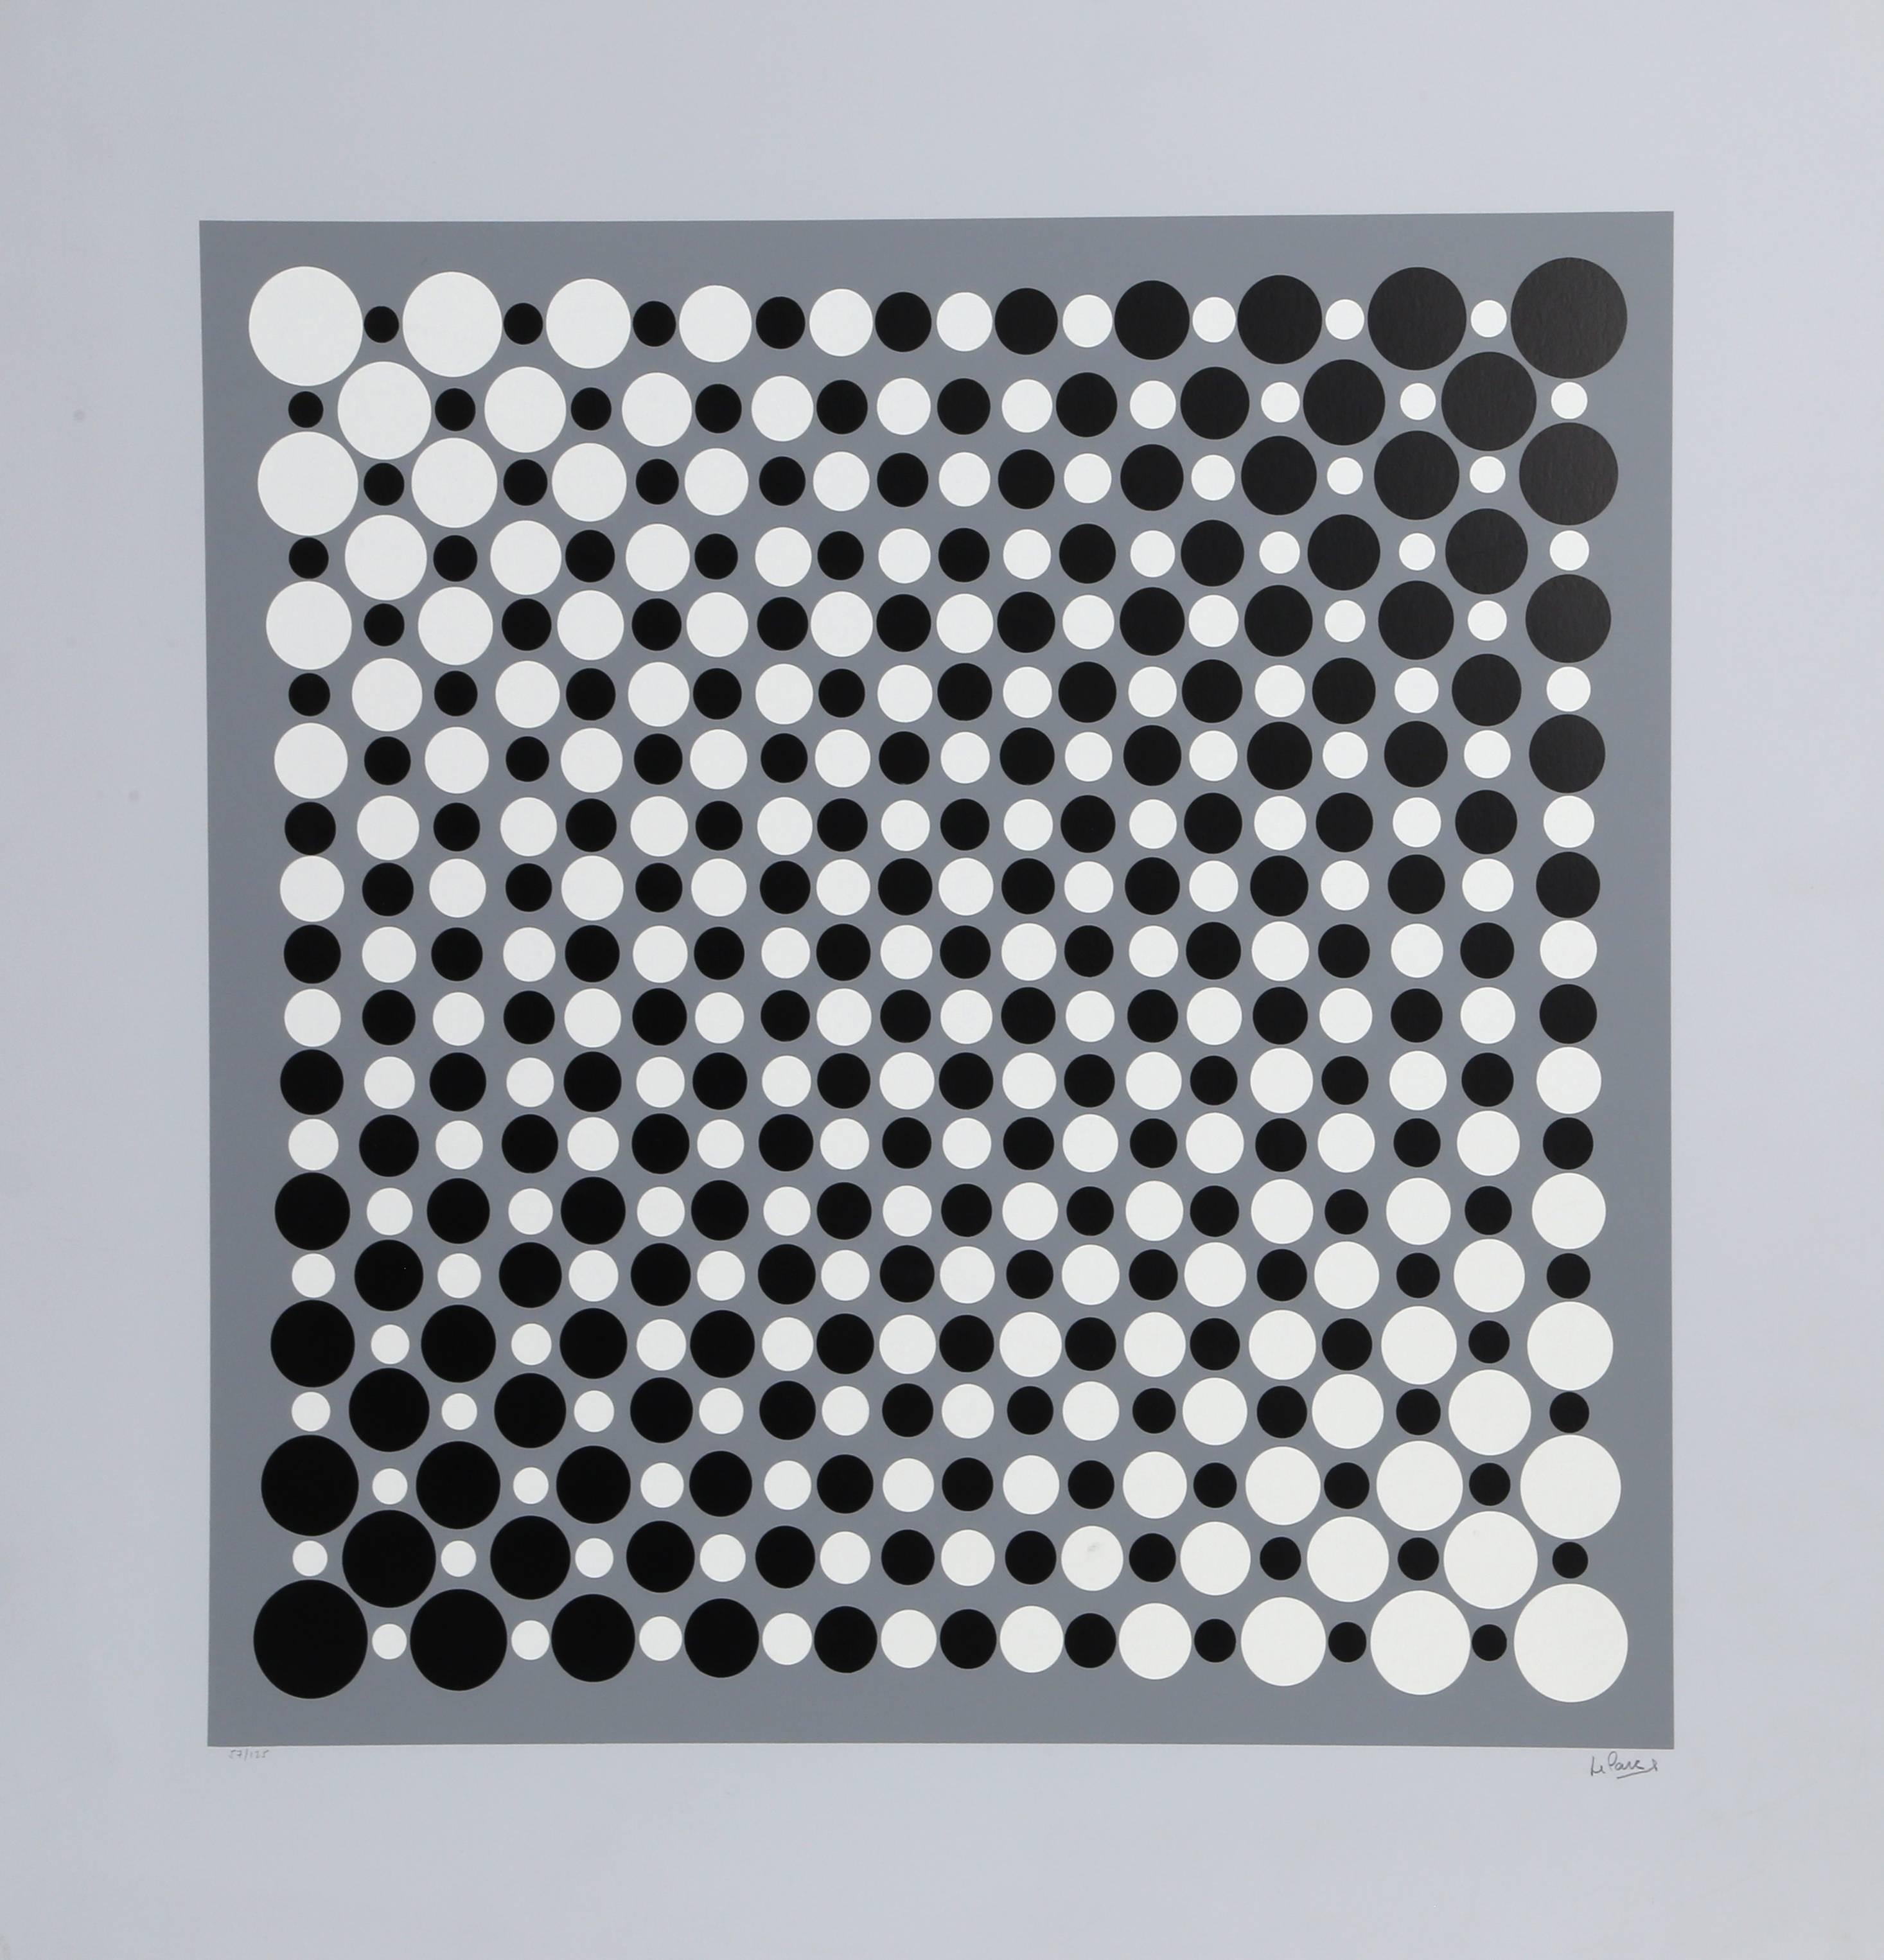 This screenprint on metallic paper was created by Argentinian artist Julio Le Parc.  Le Parc is one of Argentina's most prominent Modern artists, and his work is regarded as a precursor to Kinetic and Op art. This piece is signed and numbered